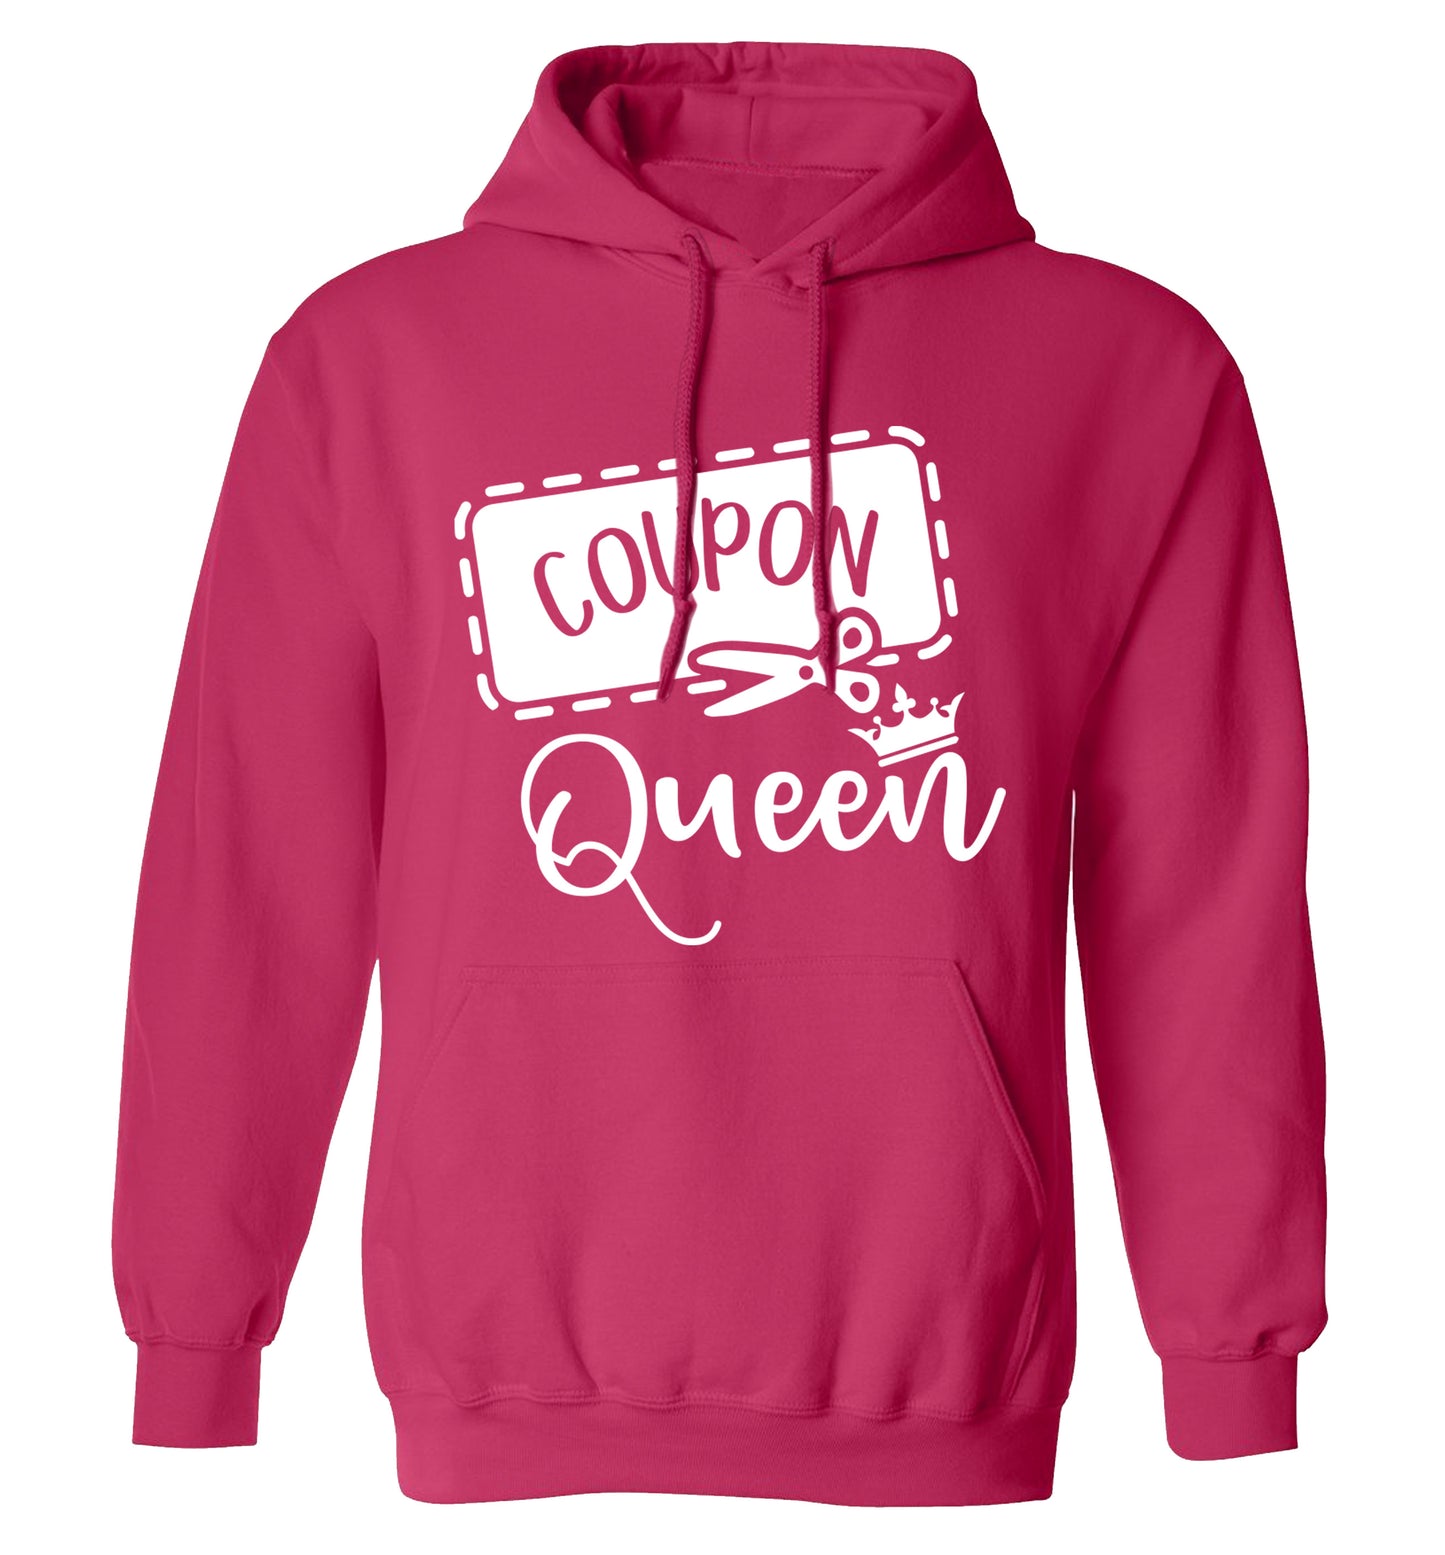 Coupon Queen adults unisex pink hoodie 2XL